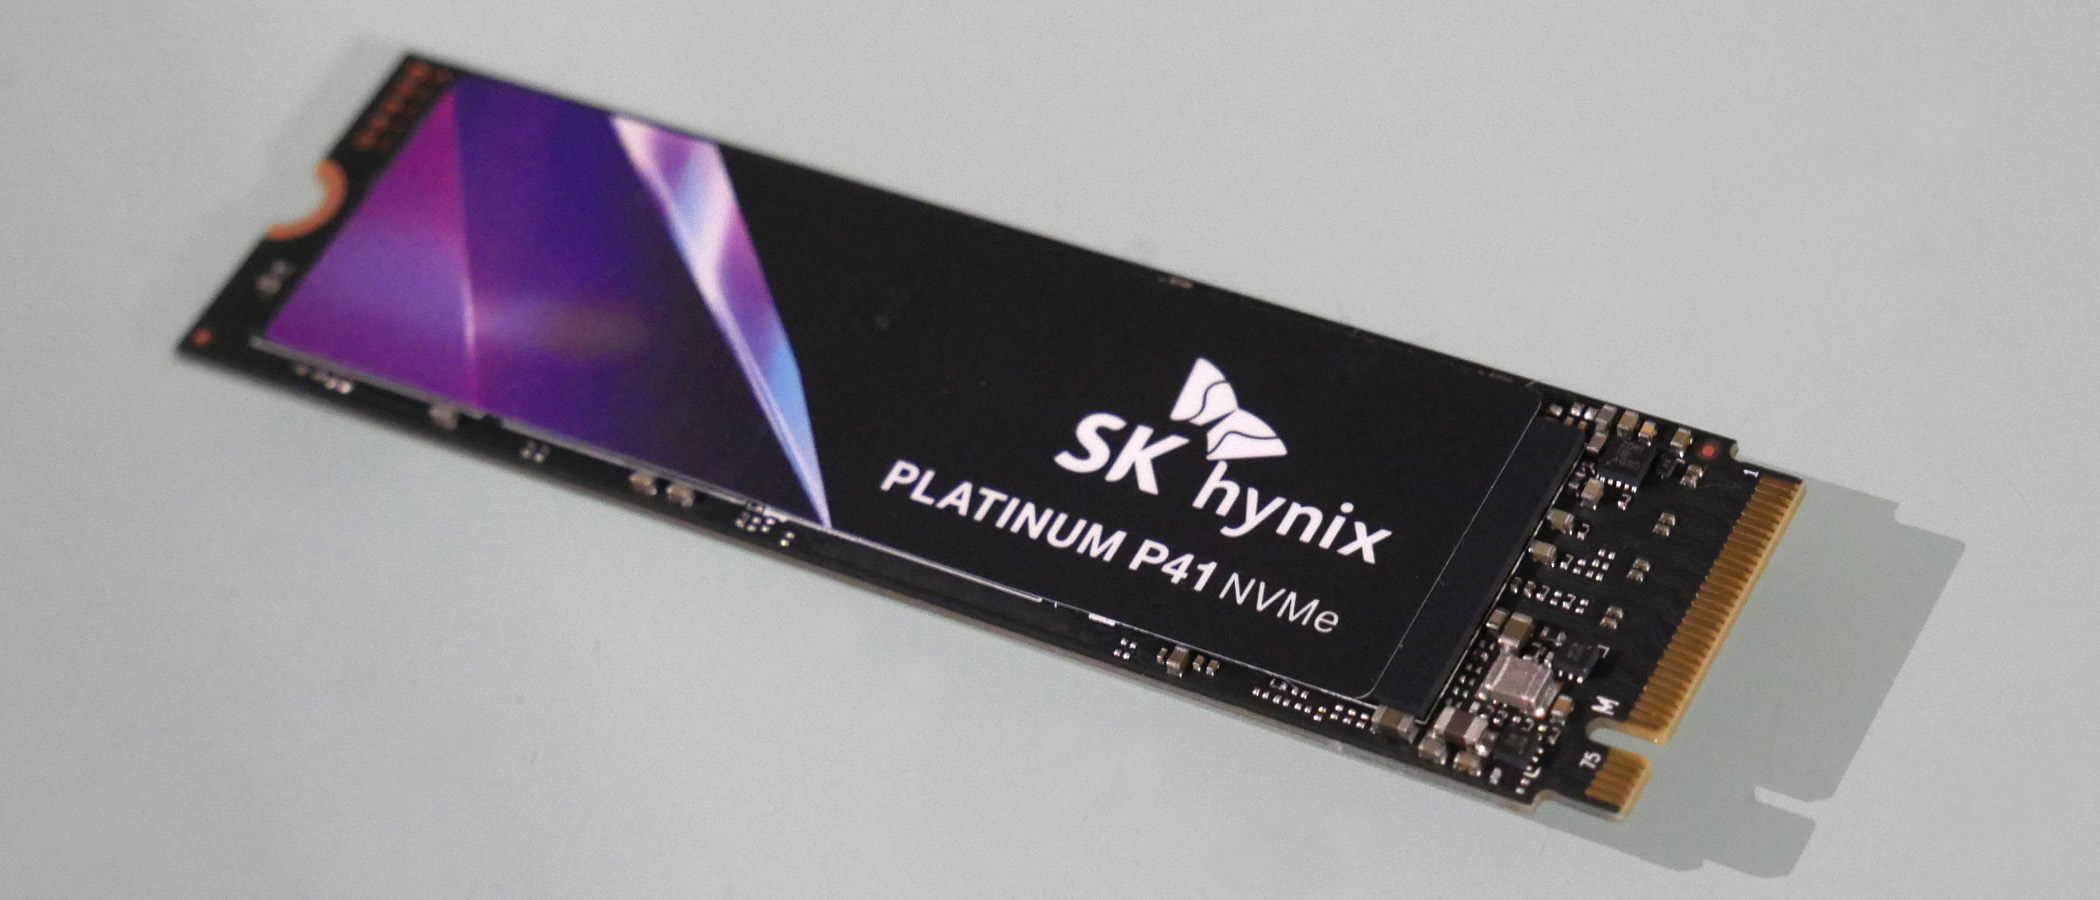 SK Hynix Platinum P41 review: "As good as any of the best Gen 4 drives